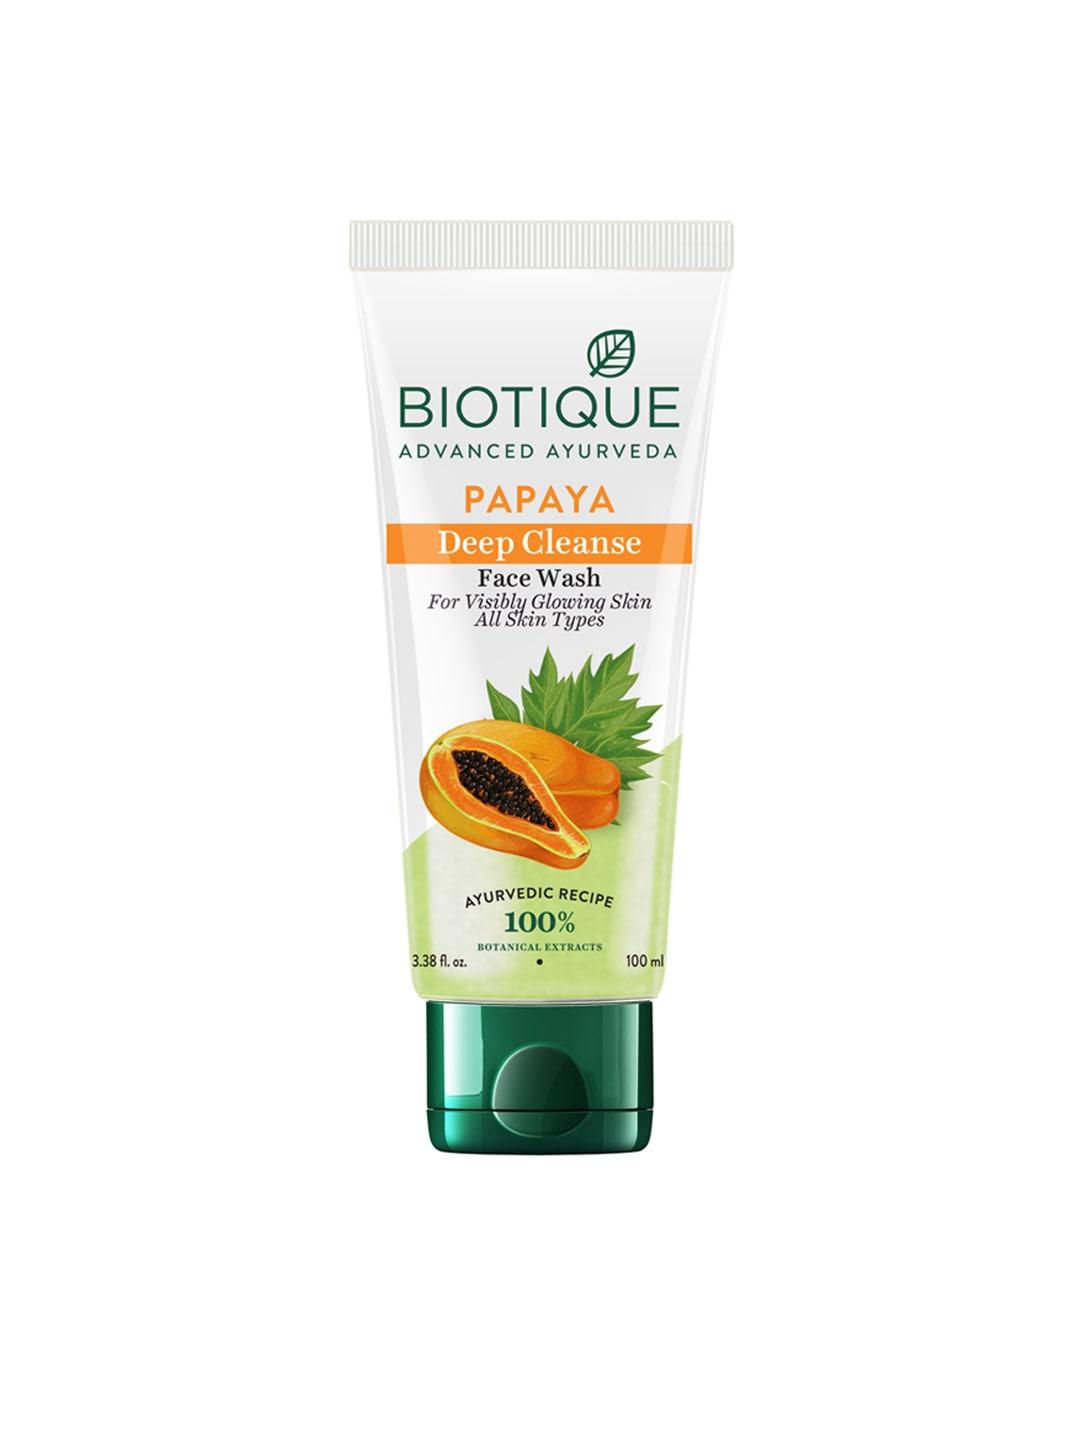 Biotique Bio Papaya Visibly Flawless Skin Sustainable Face Wash For All Skin Types - 100ml